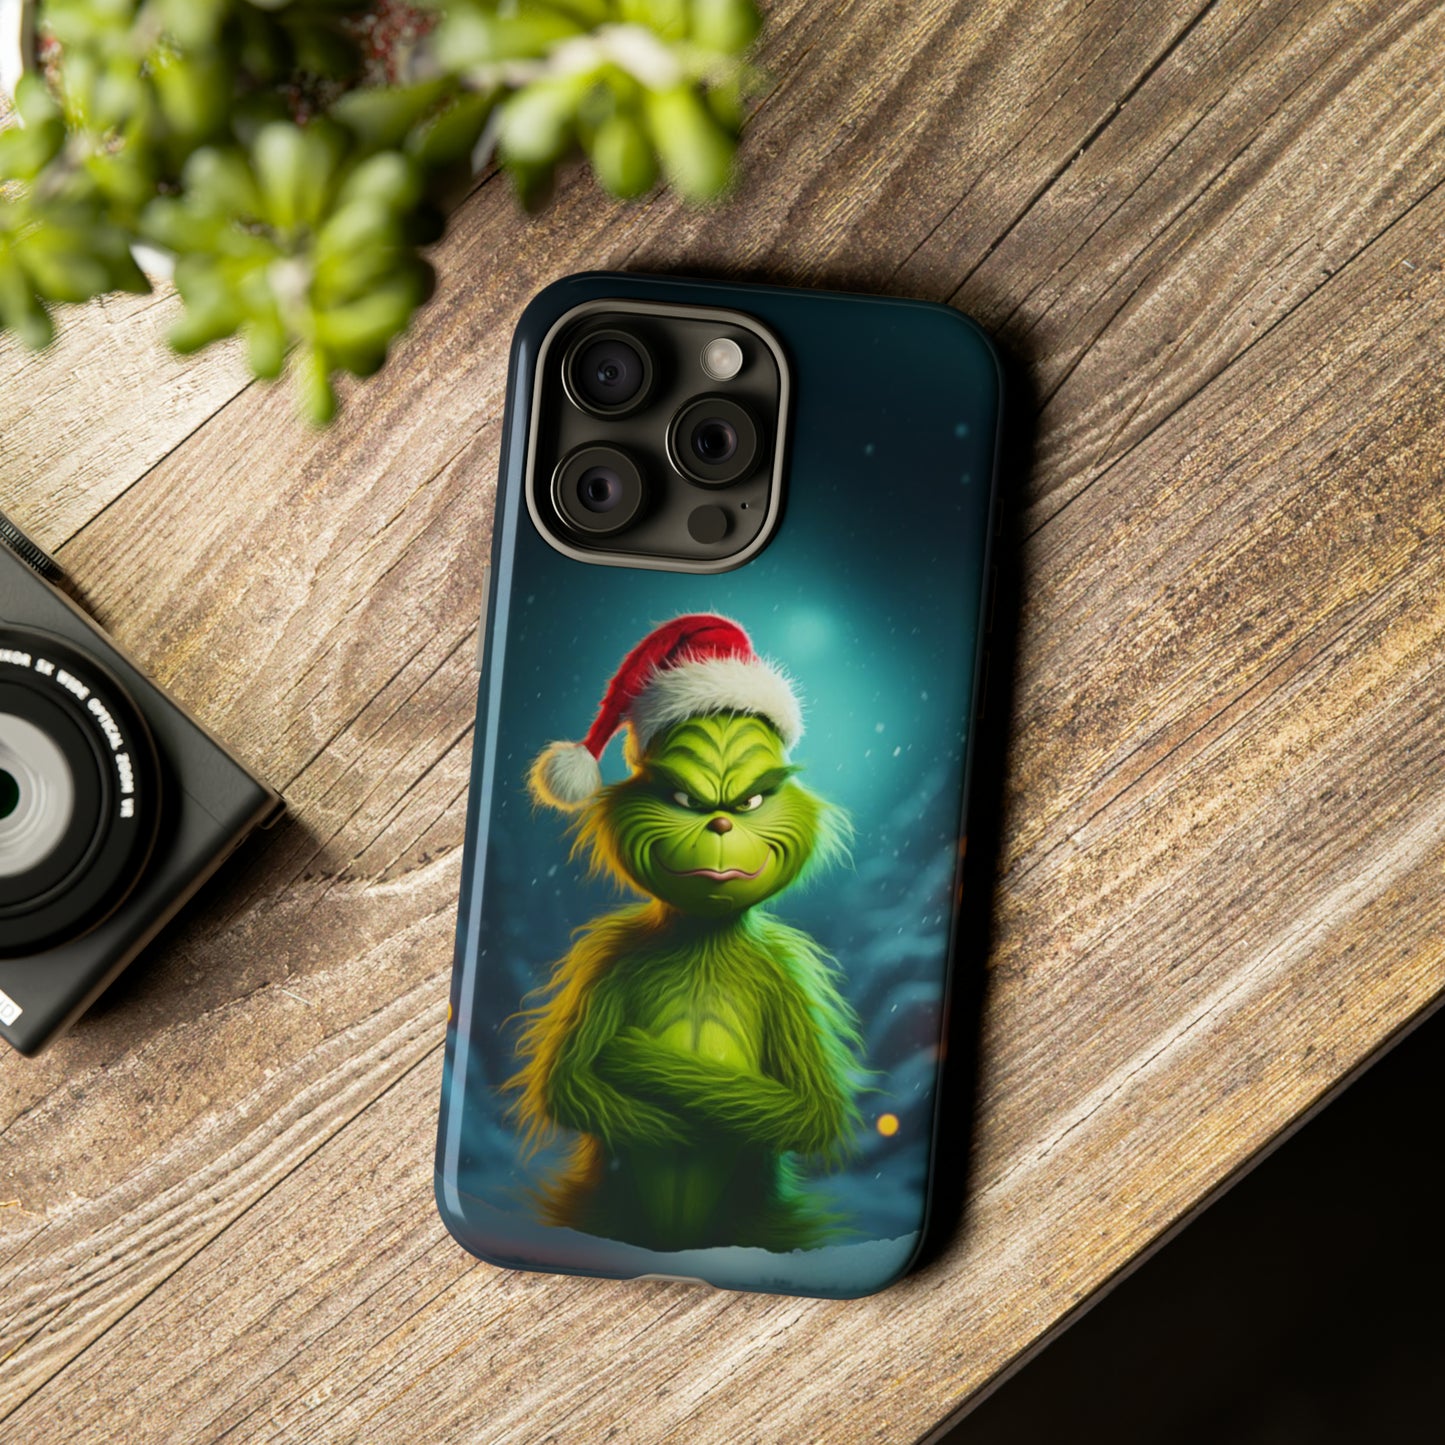 The Grinch Tough Christmas Phone Case iPhone Samsung Galaxy Google Pixel Christmas Cell Phone Cases